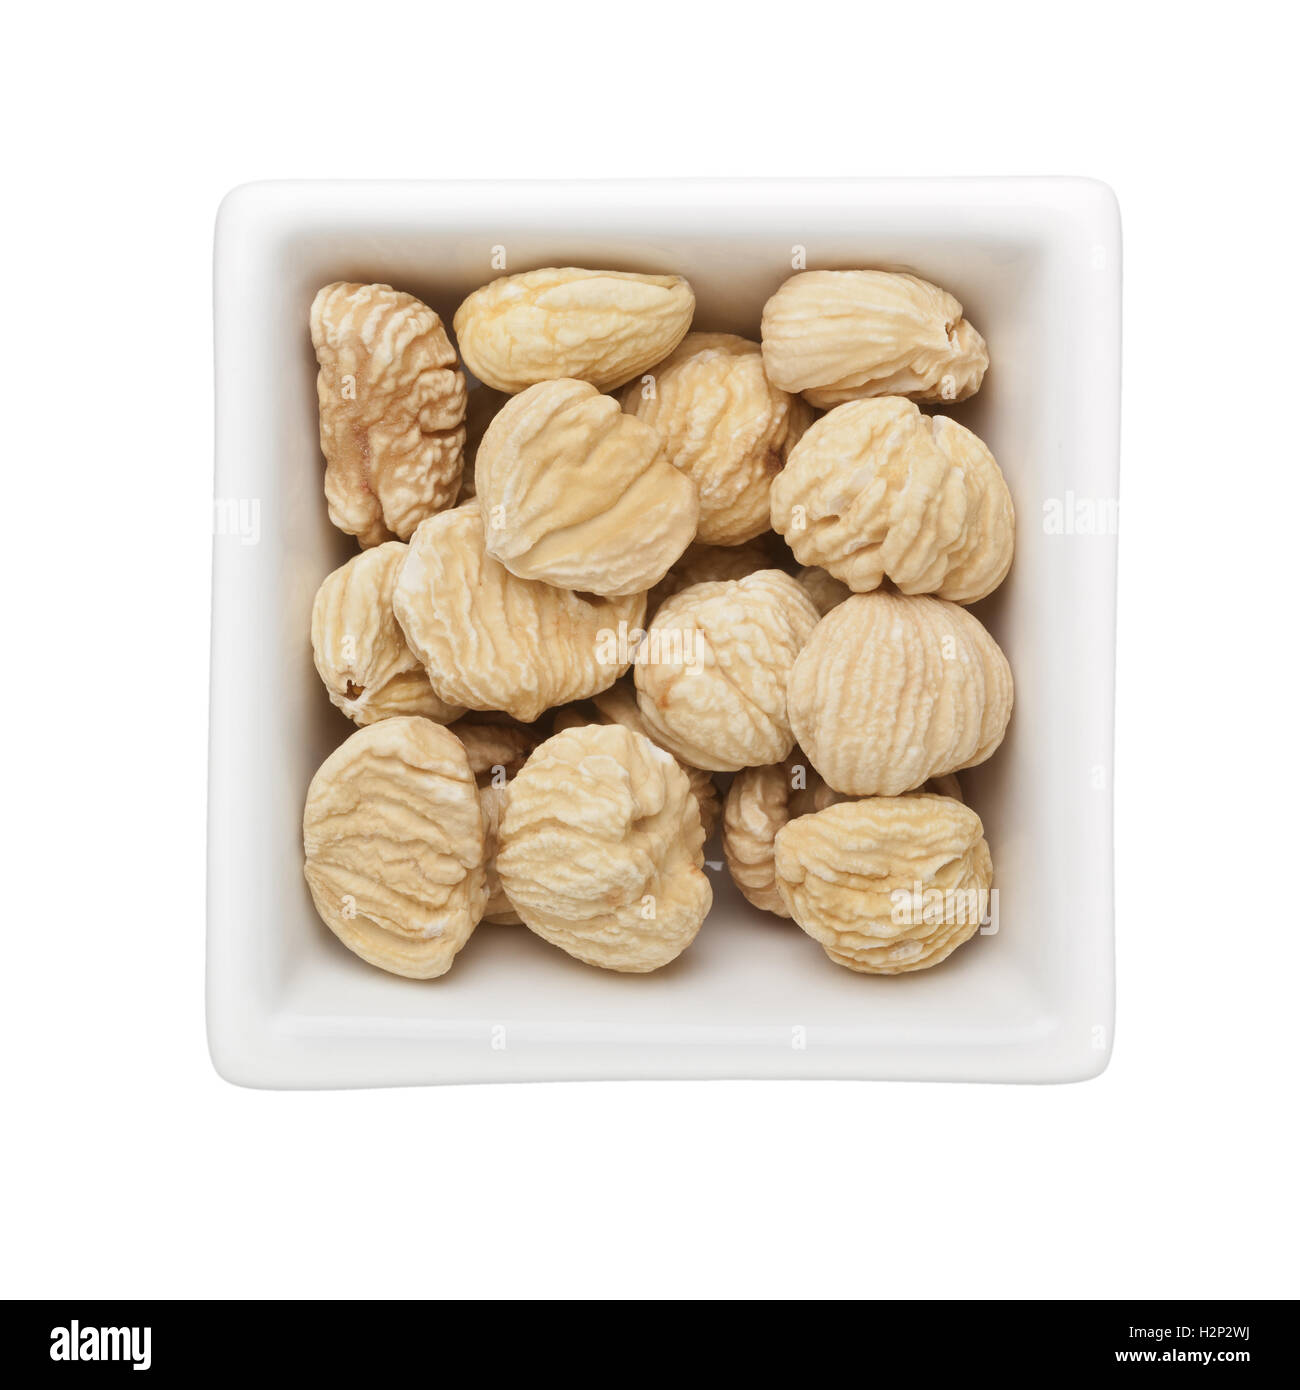 Dried unshelled chestnuts in a square bowl isolated on white background Stock Photo